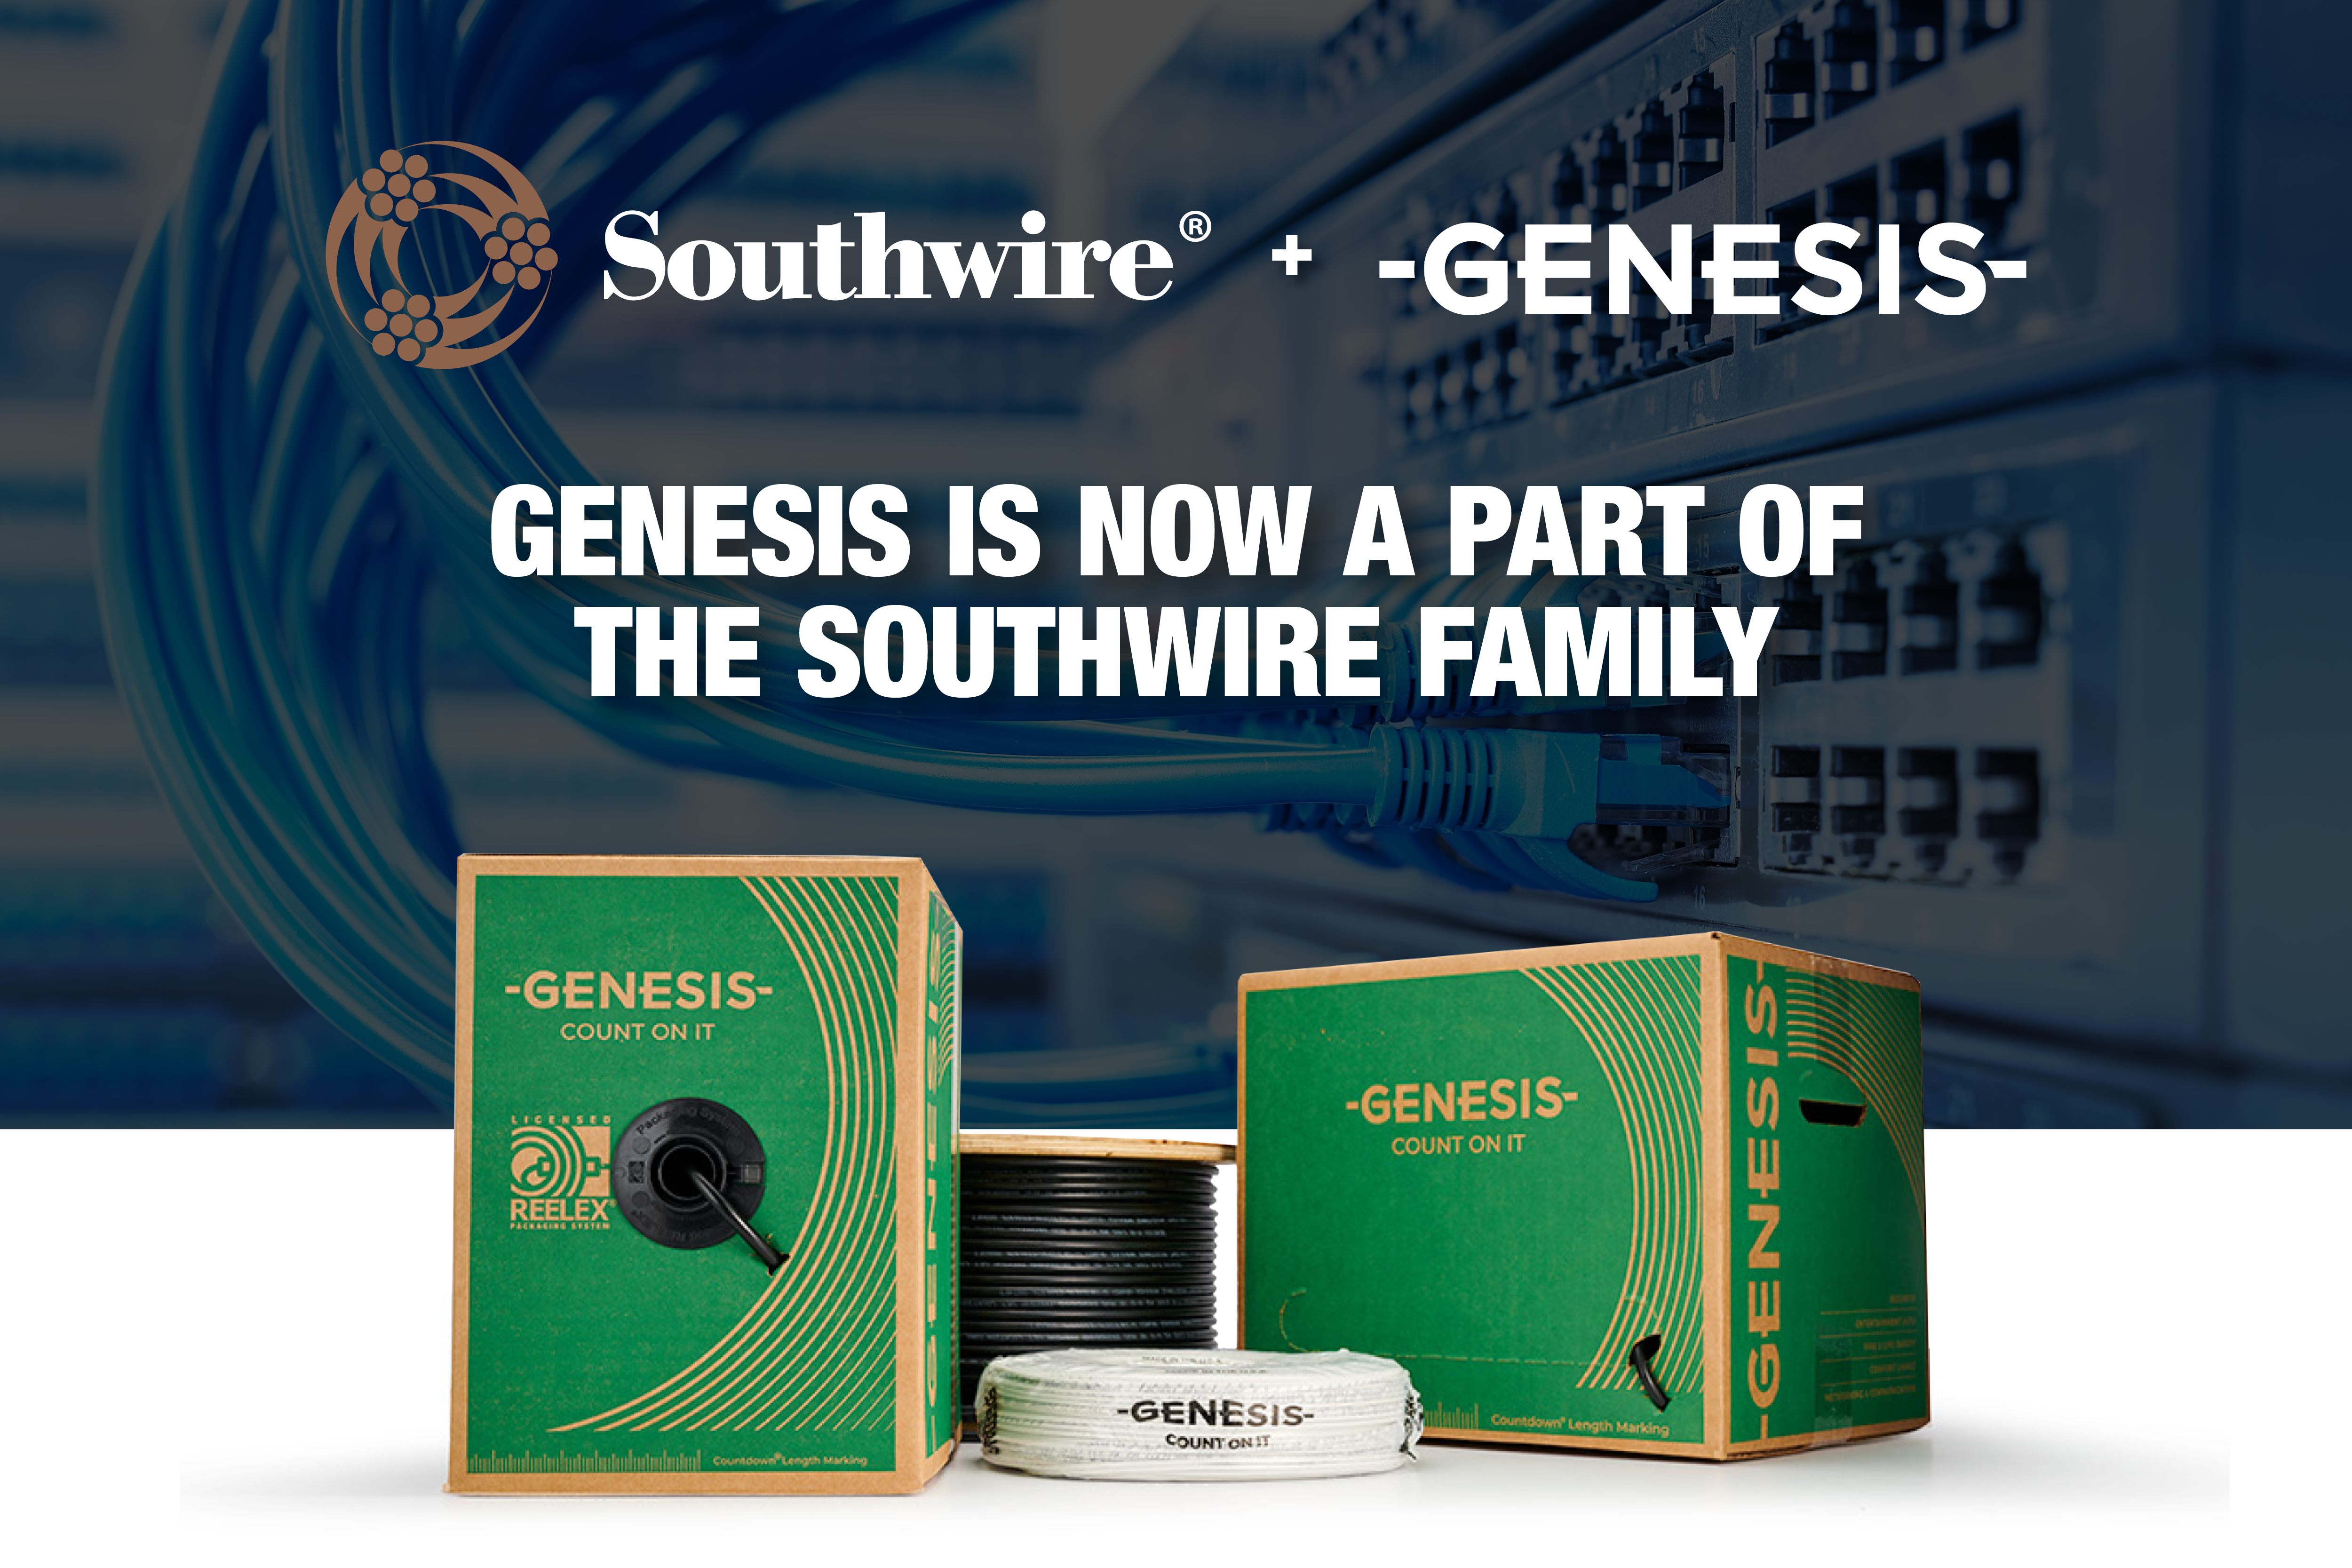 Southwire and Resideo Announce Agreement Related to the Sale of Resideo's Genesis Wire & Cable Business